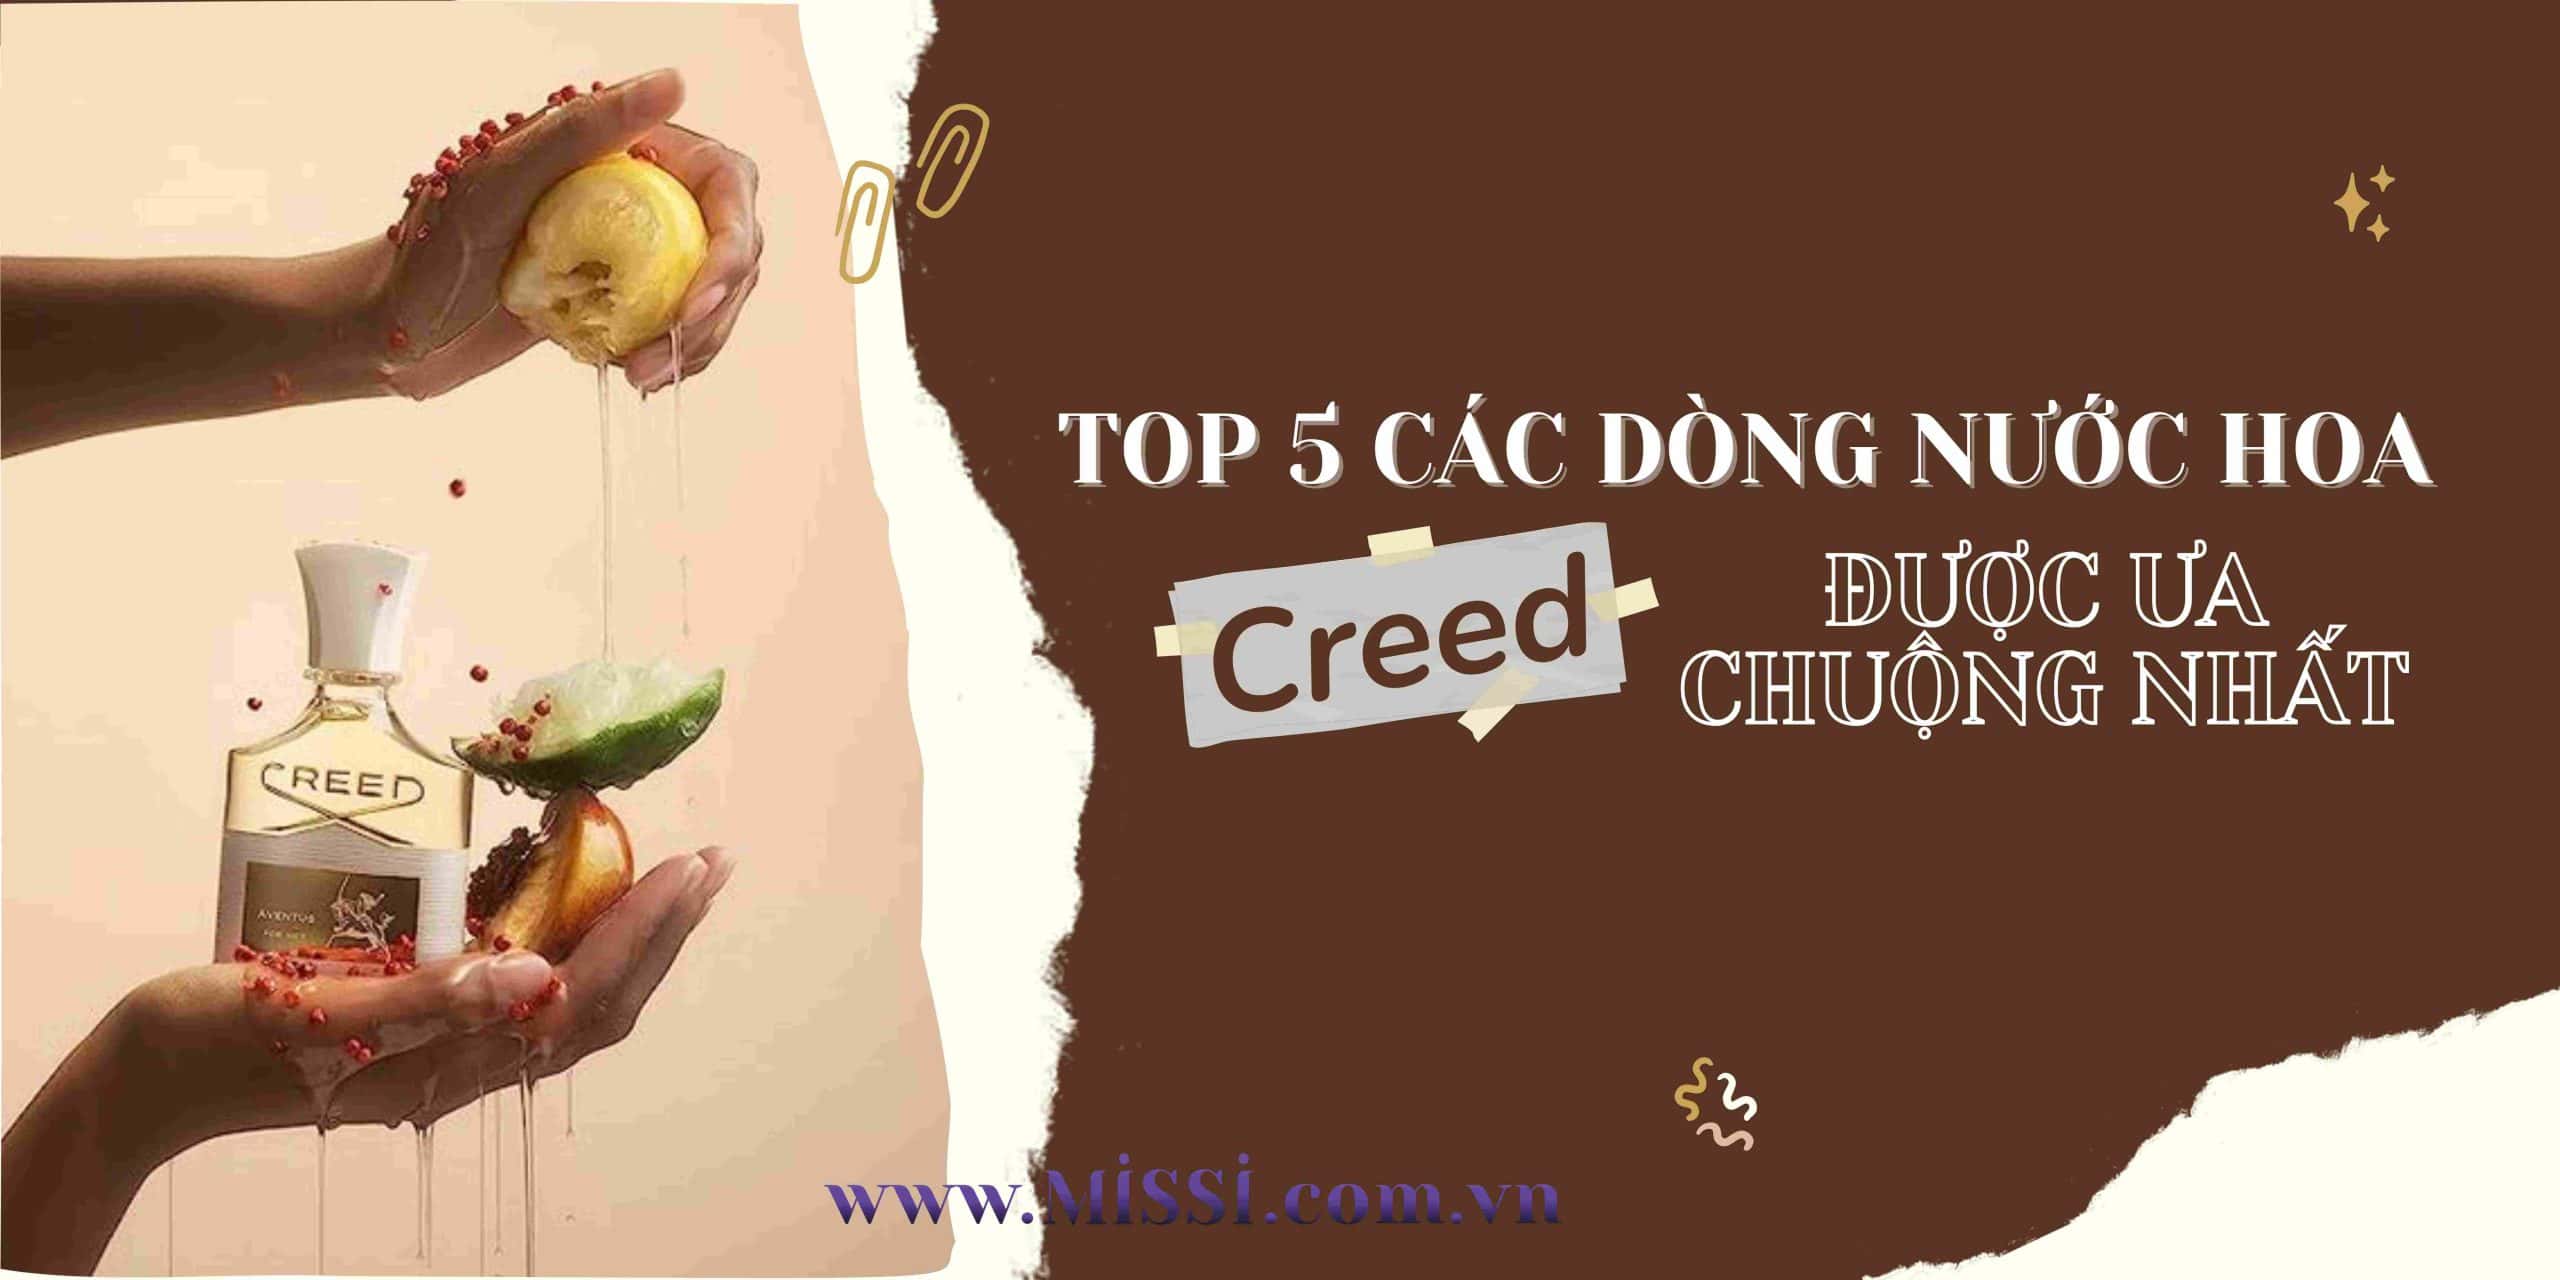 TOP 5 cac dong nuoc hoa Creed duoc ua chuong nhat scaled